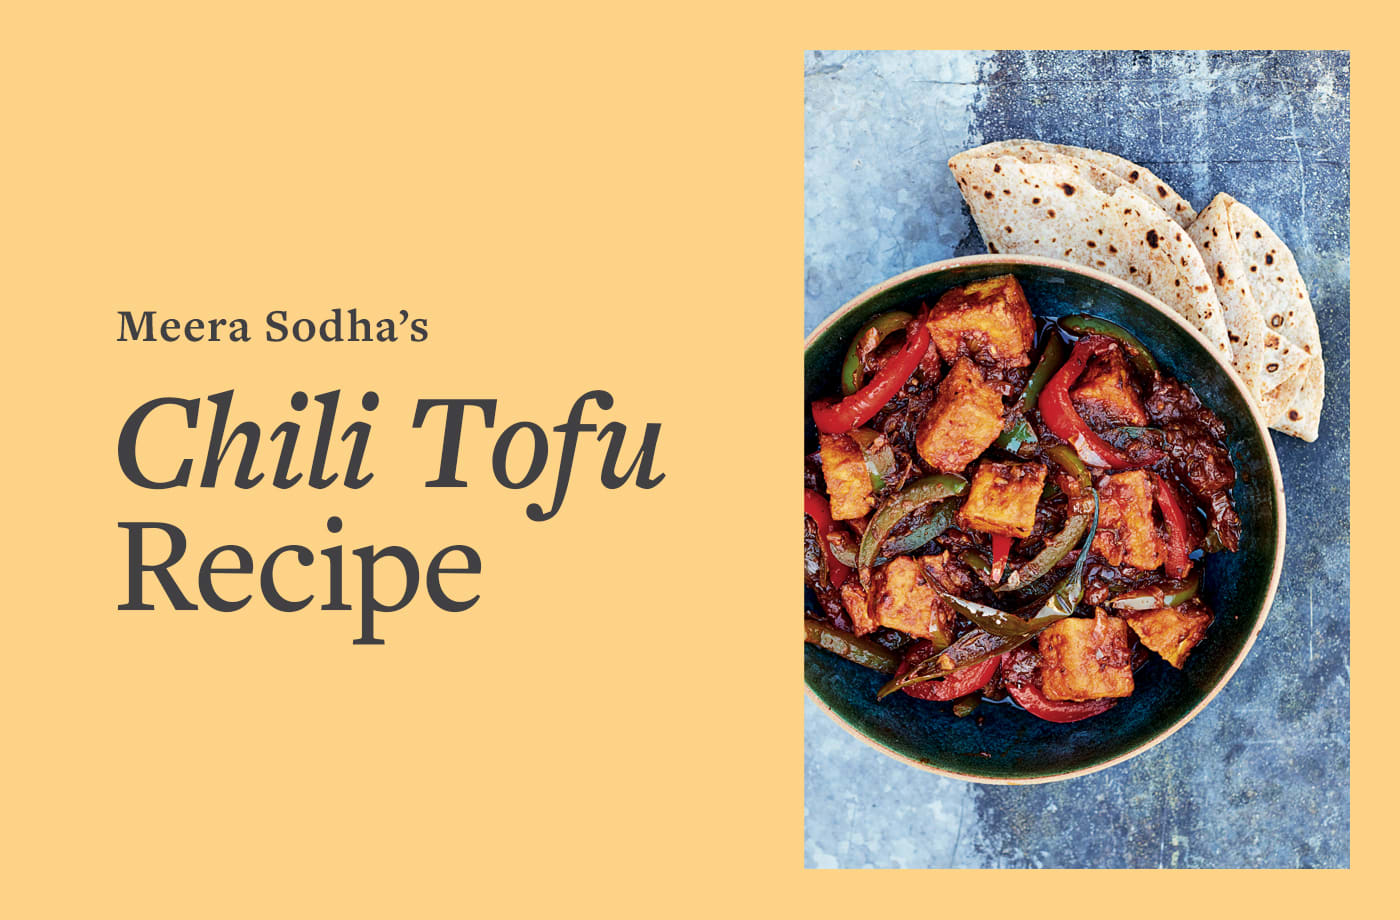 Meera Sodha Shares the Vegan Chile Tofu Recipe That Transports Her Back to Her Childhood in a Single Bite